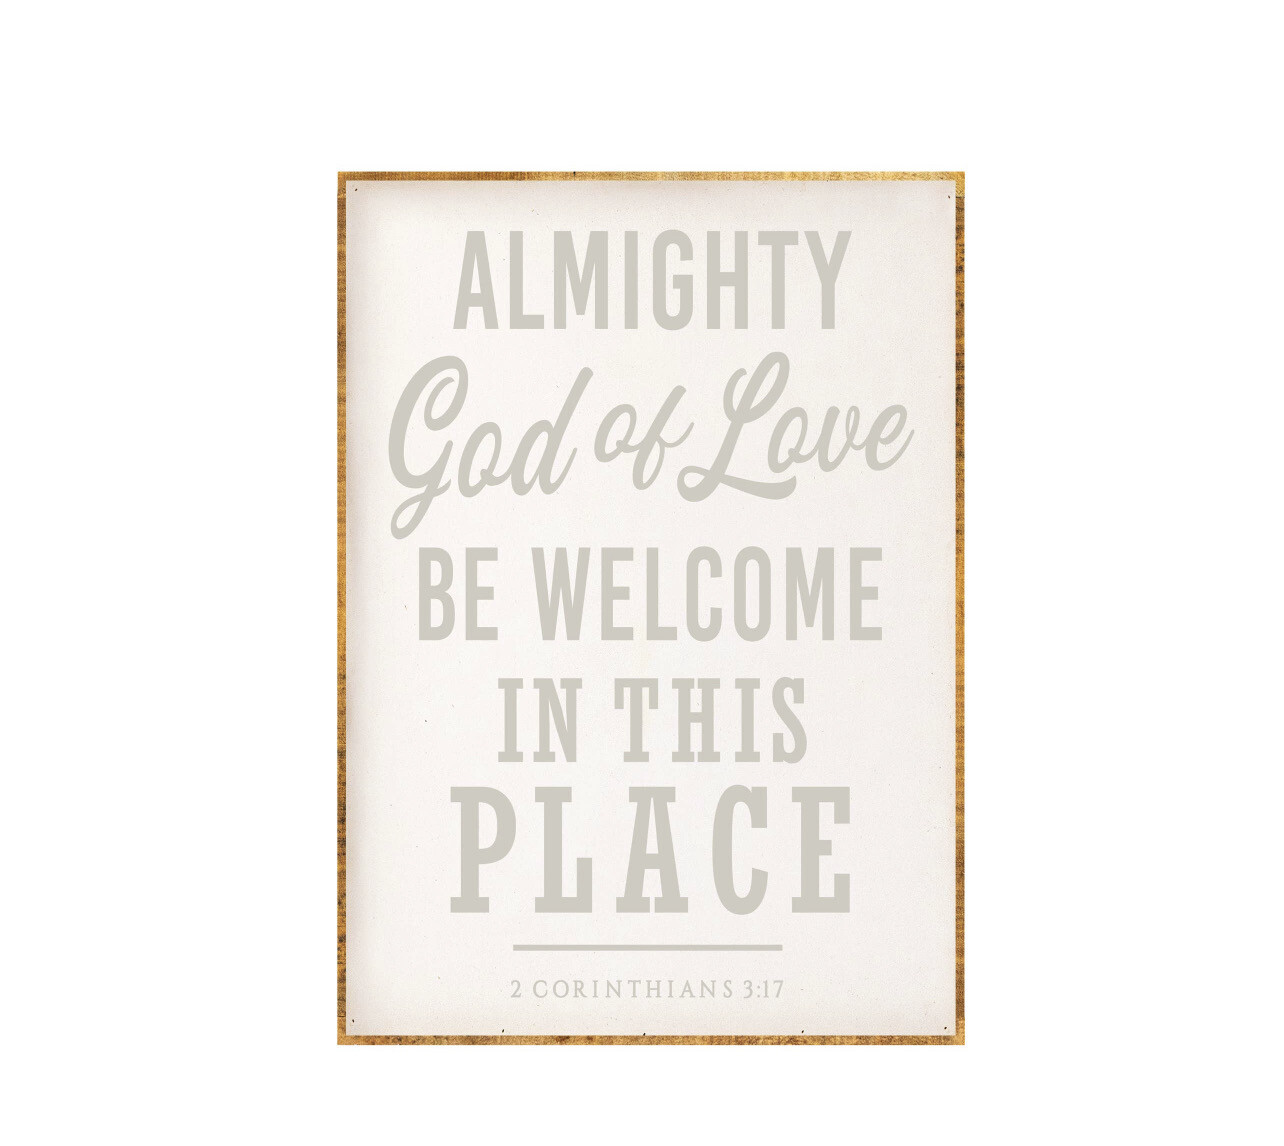 17x24 Almighty God Of Love Be Welcome 2 Cor 3:17 Gray Lettering